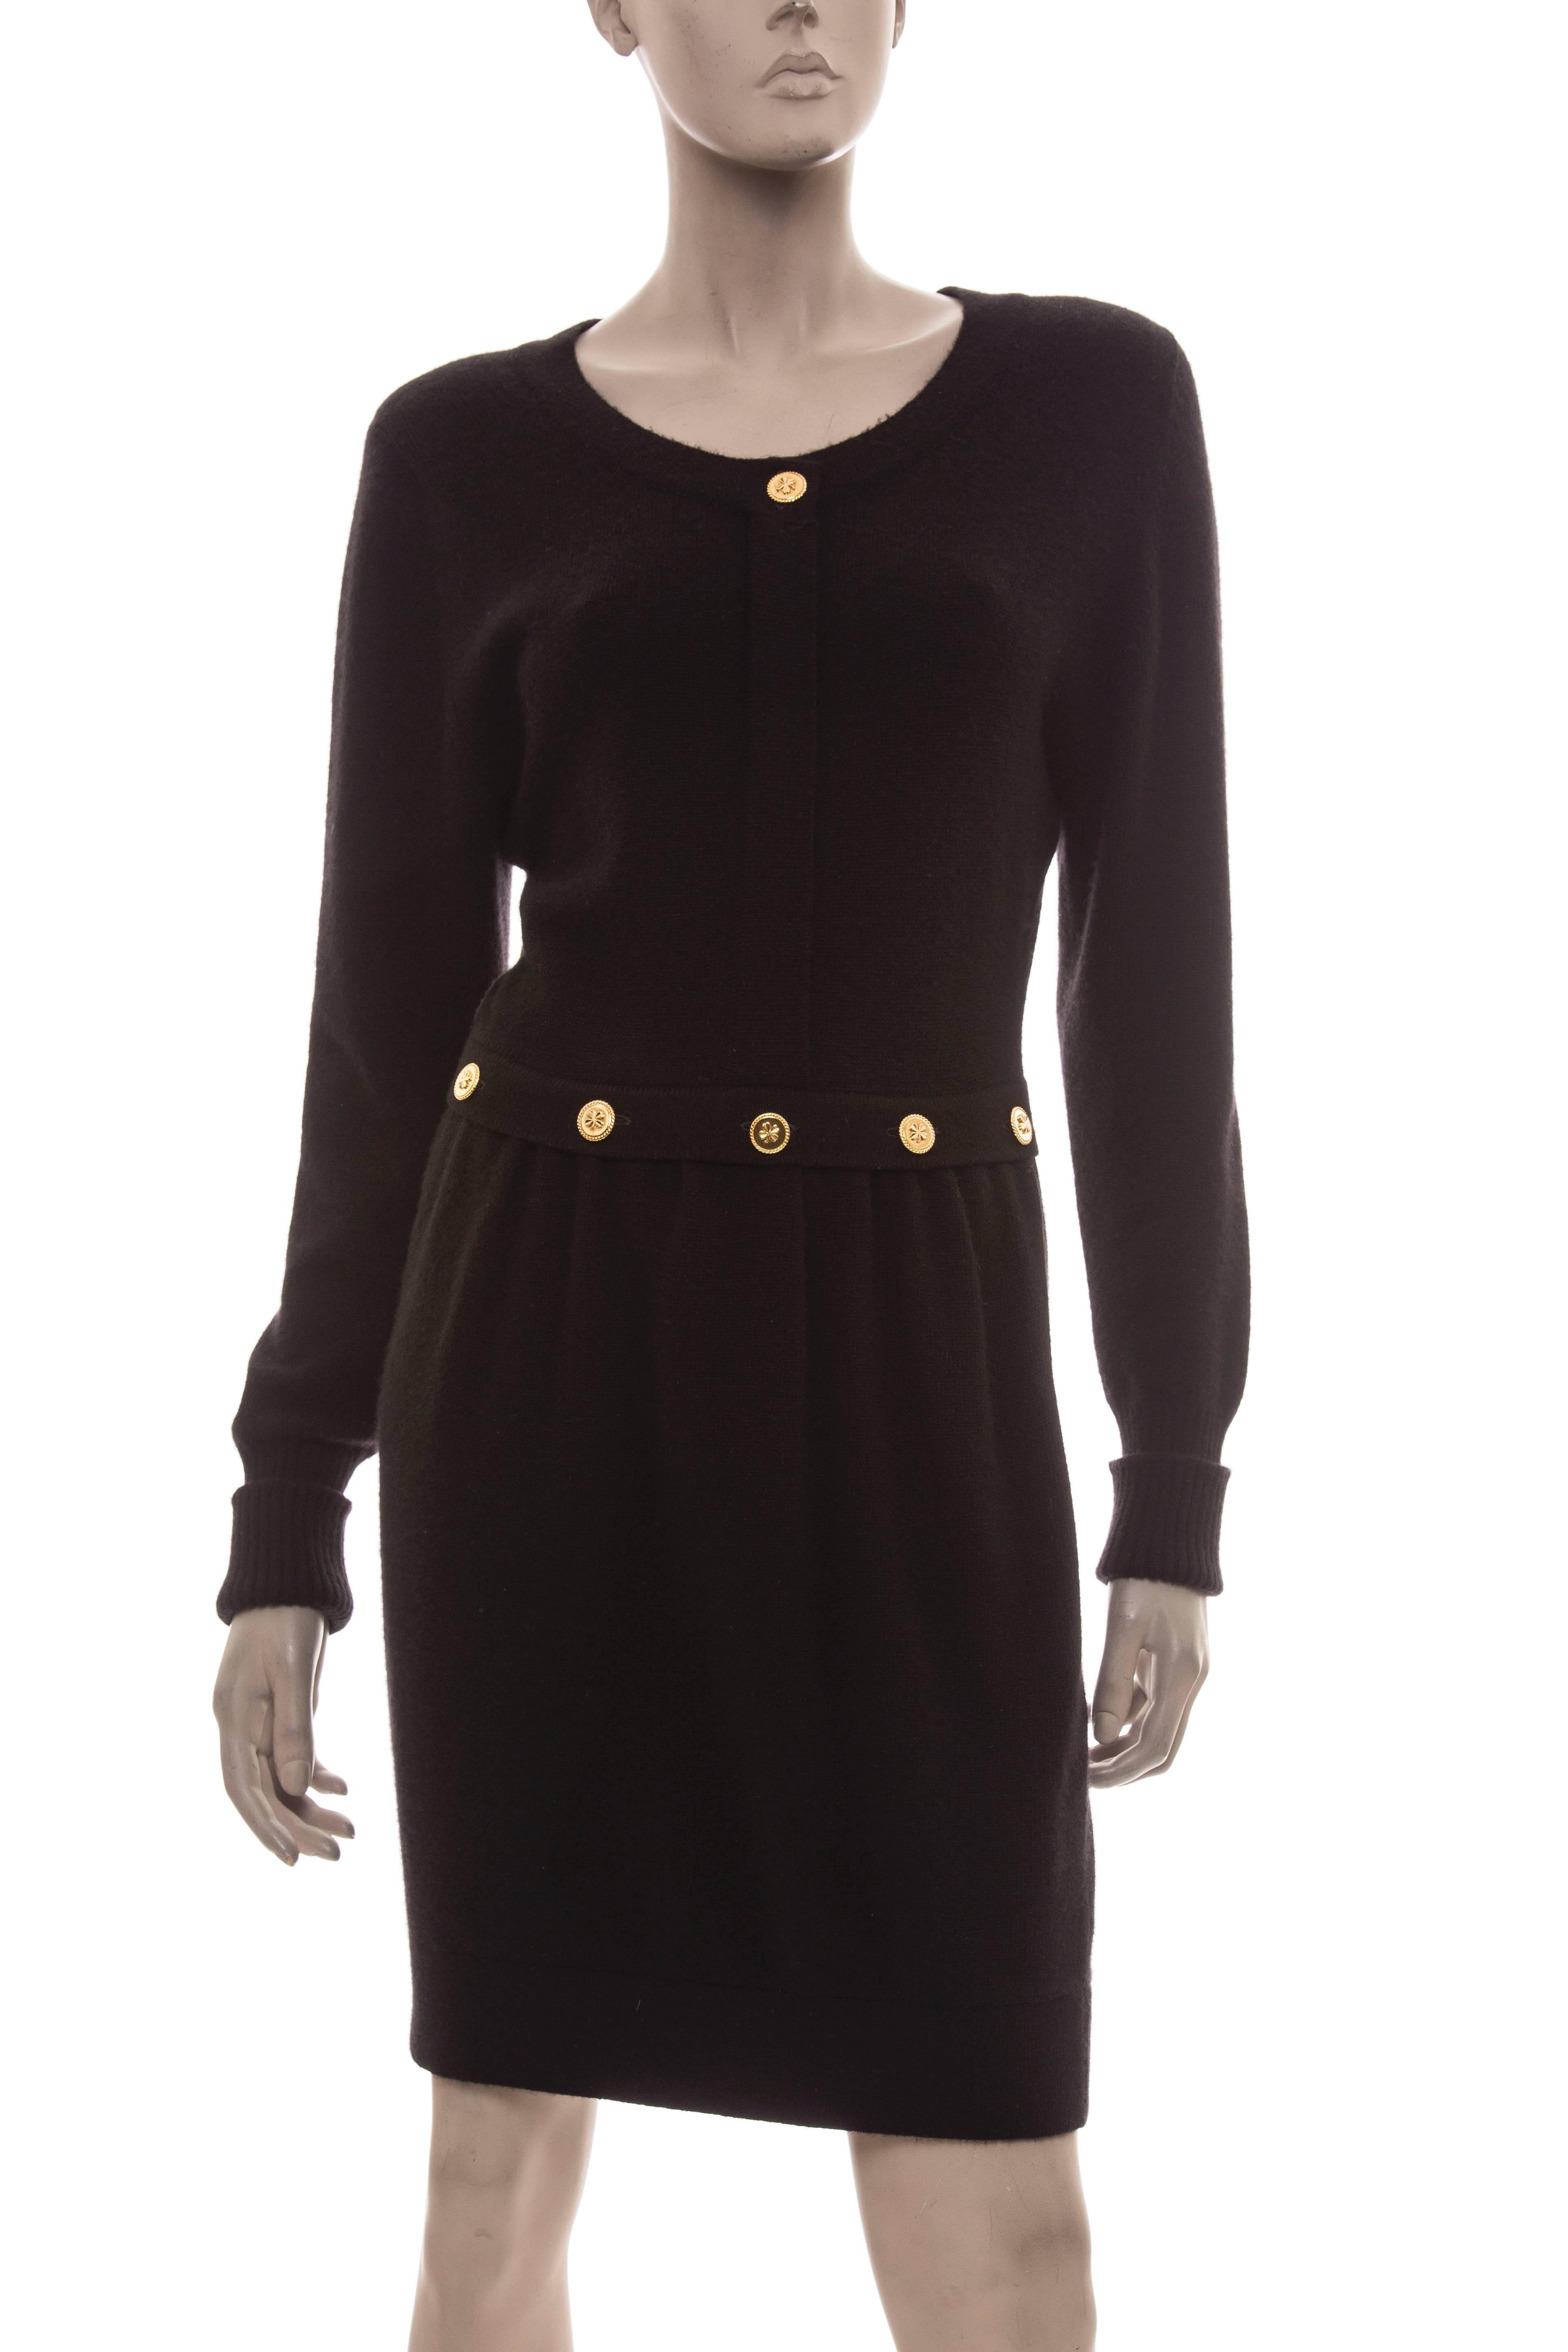 Chanel, circa 1980's, black cashmere long sleeve dress with gold-tone buttons.